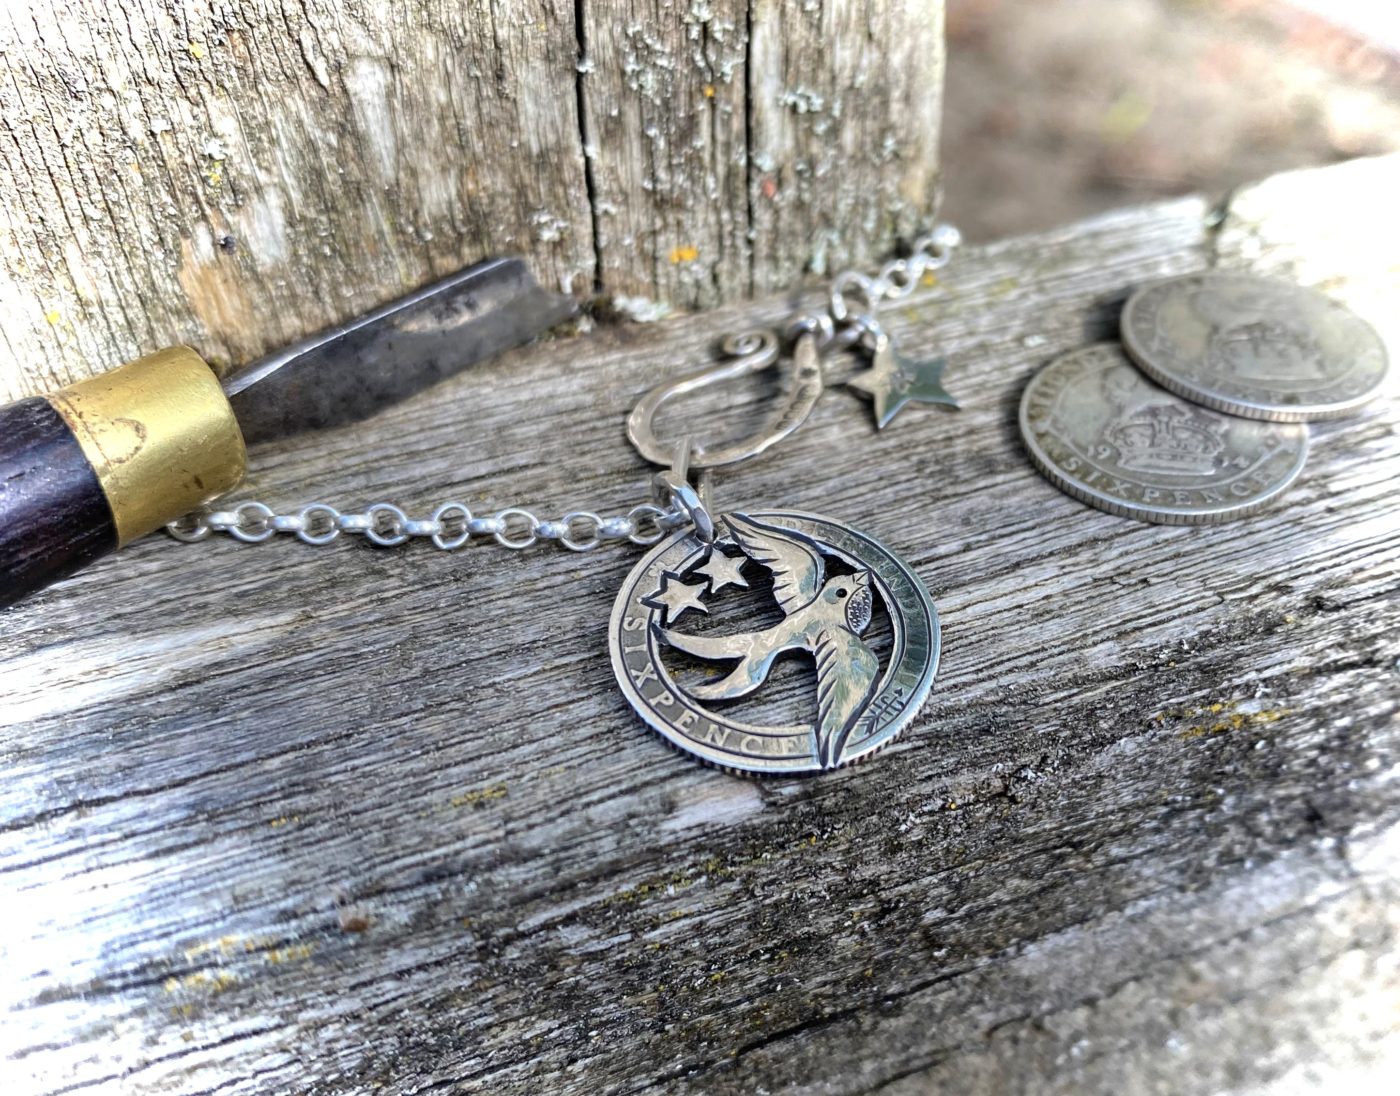 Handcrafted and repurposed silver sixpence coin birdsong swallow pendant necklace